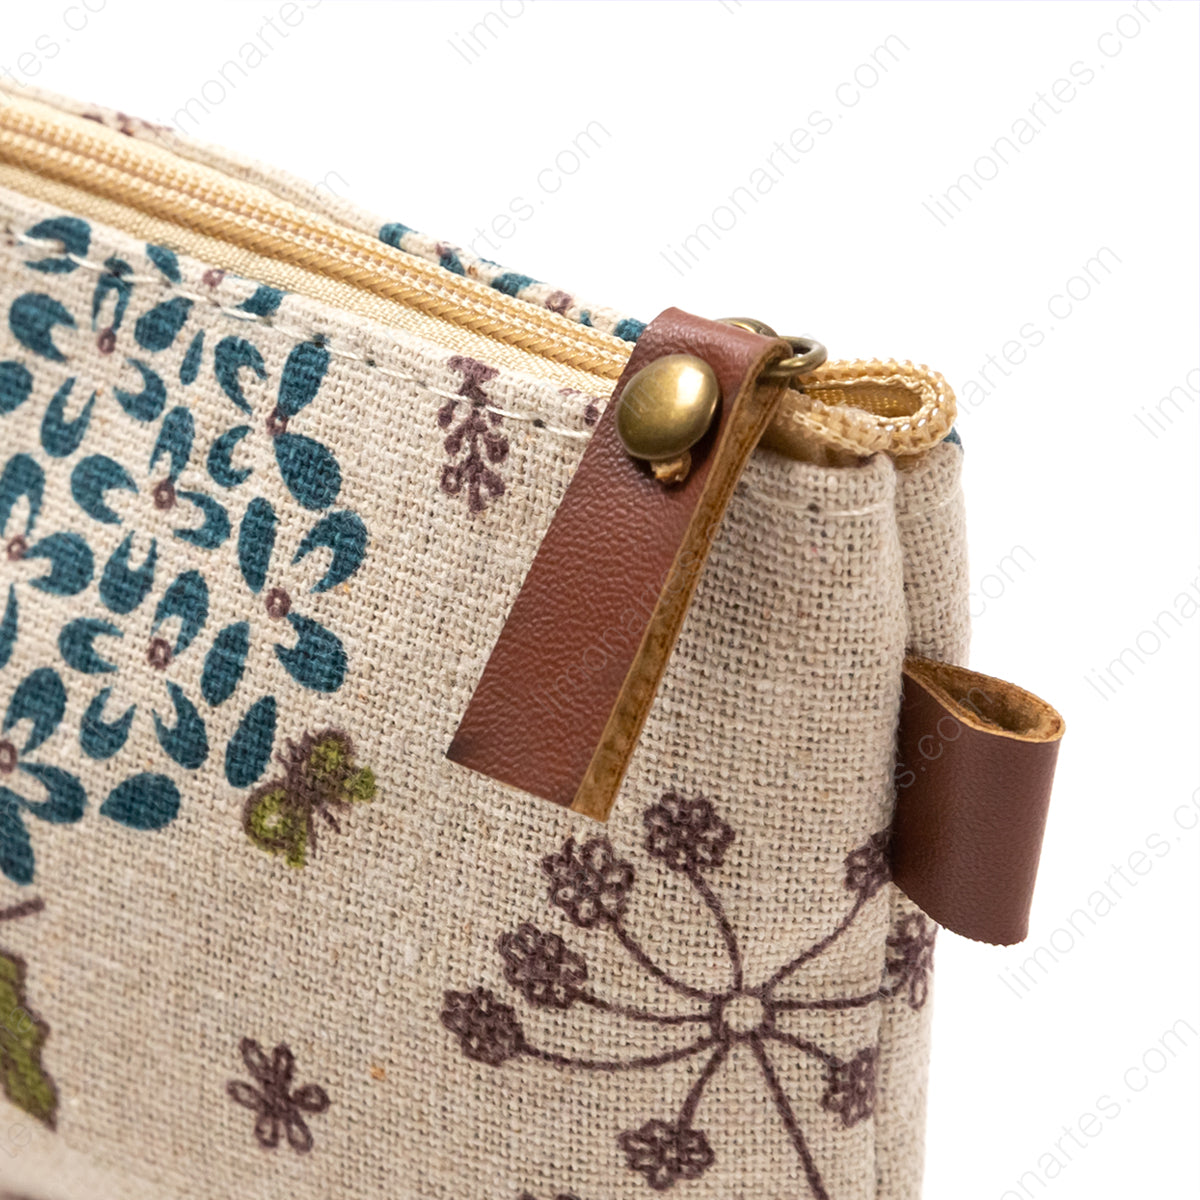 Canvas Zipper Bag, Canvas Pencil Bag, for Stationery, Cosmetics, Travel  Material